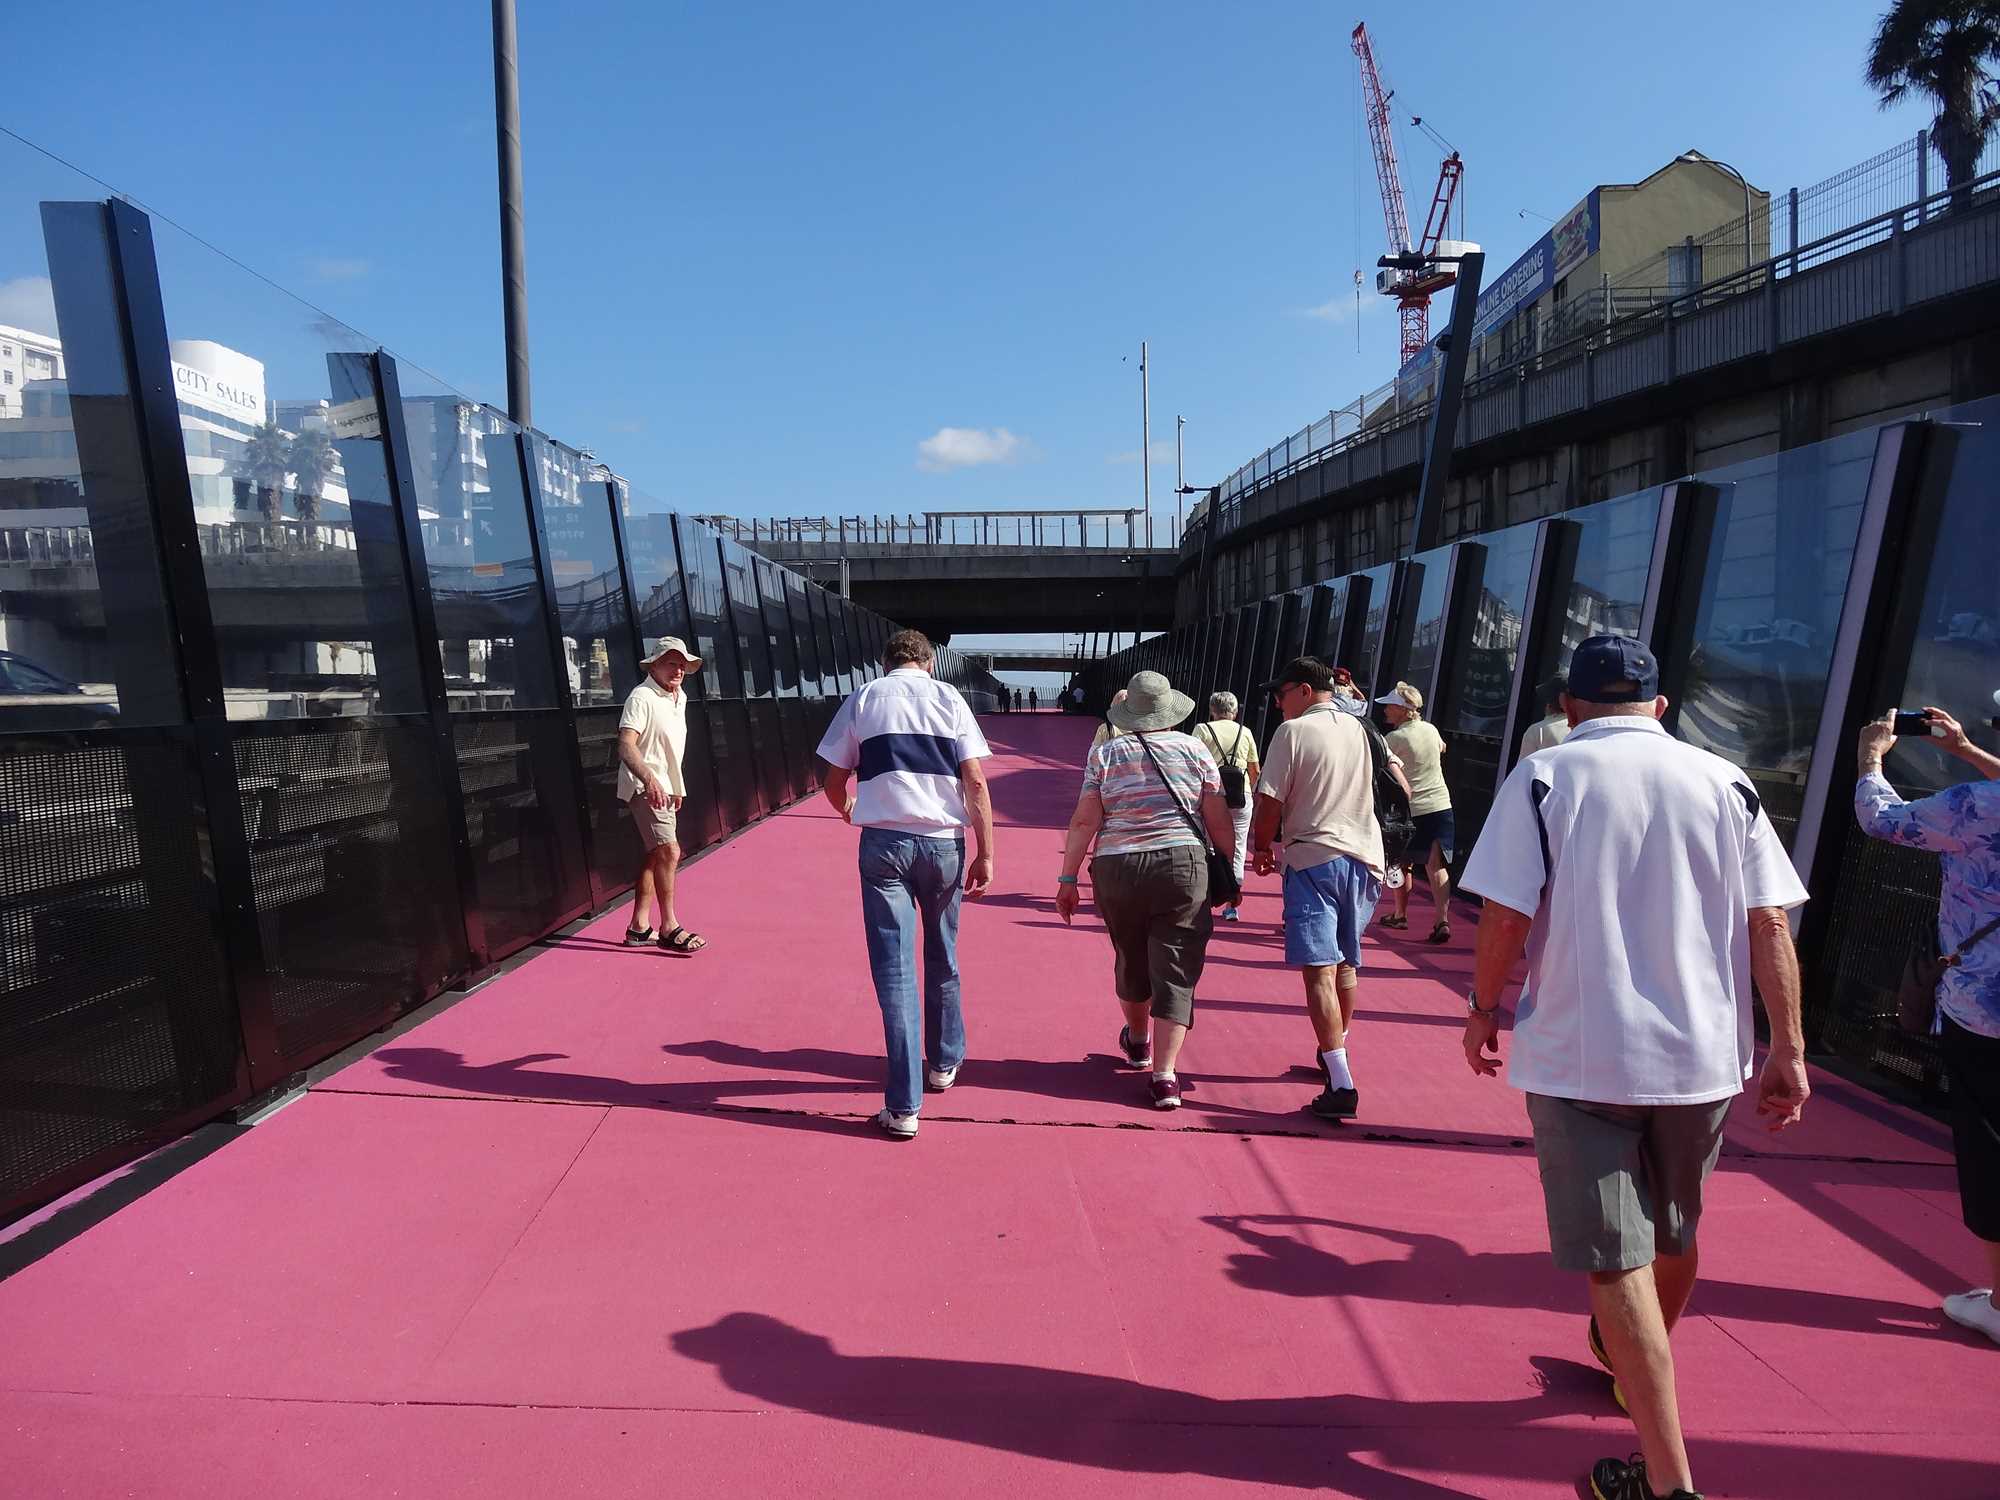 February 2016 walking Auckland's pink path